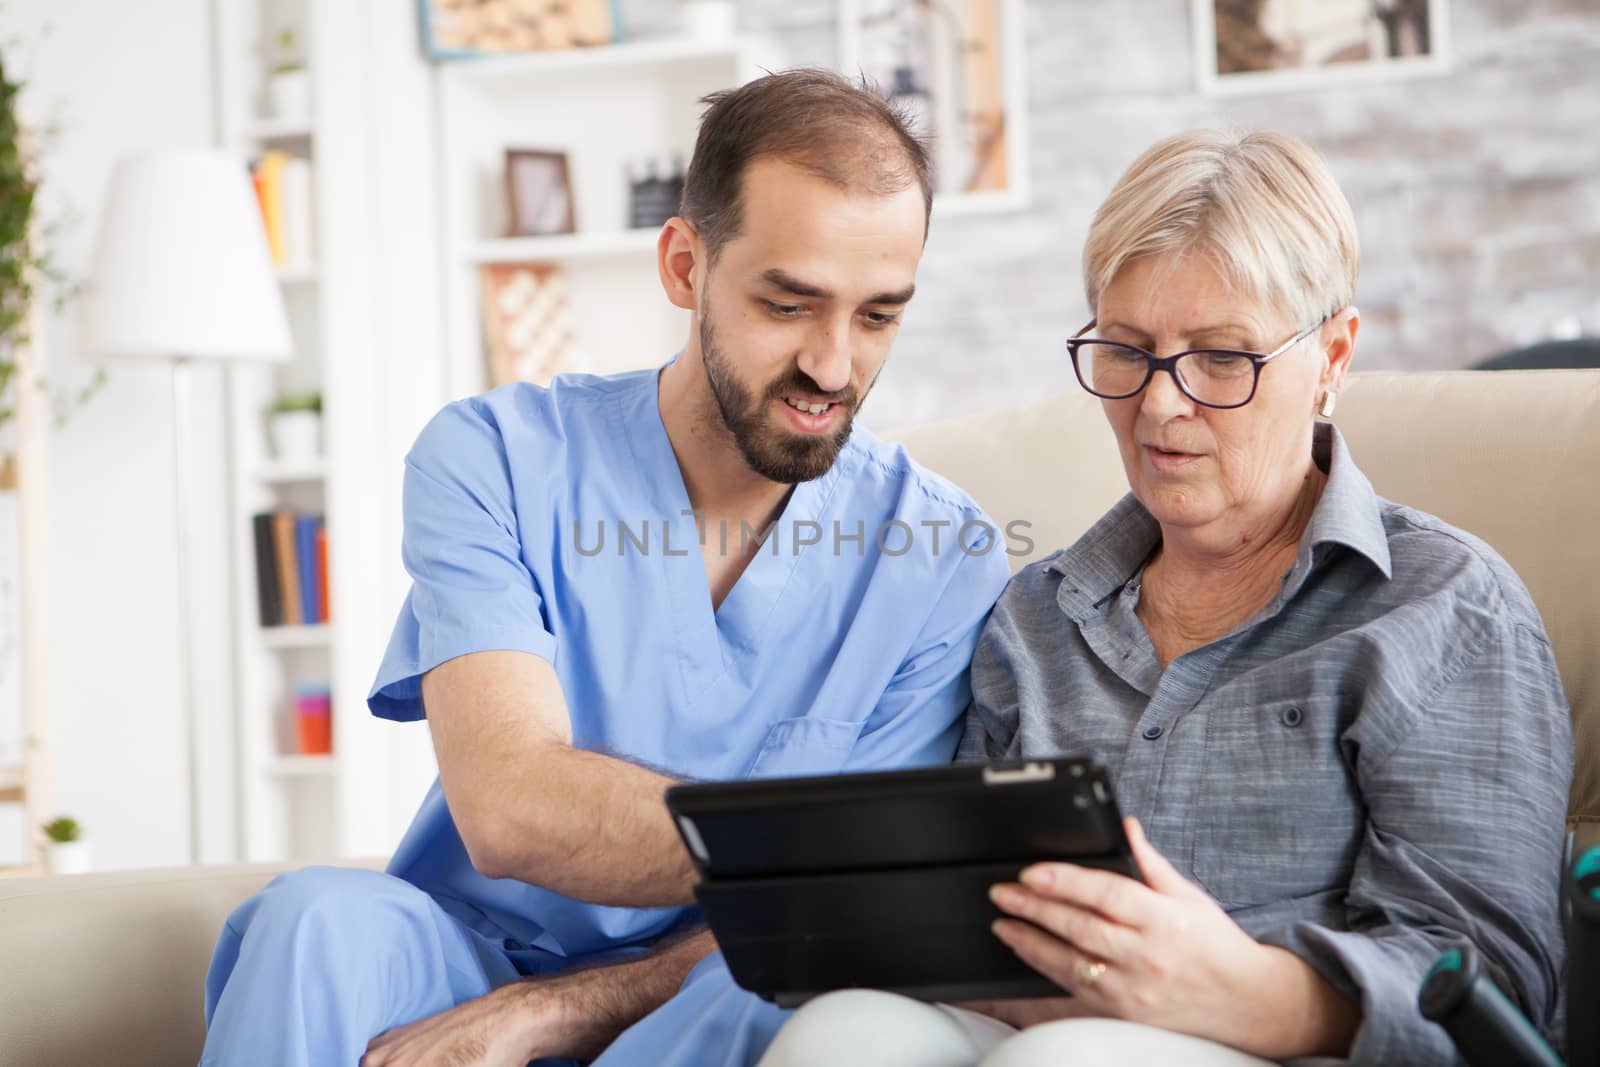 Health visitor helping senior woman to use tablet in nursing home.